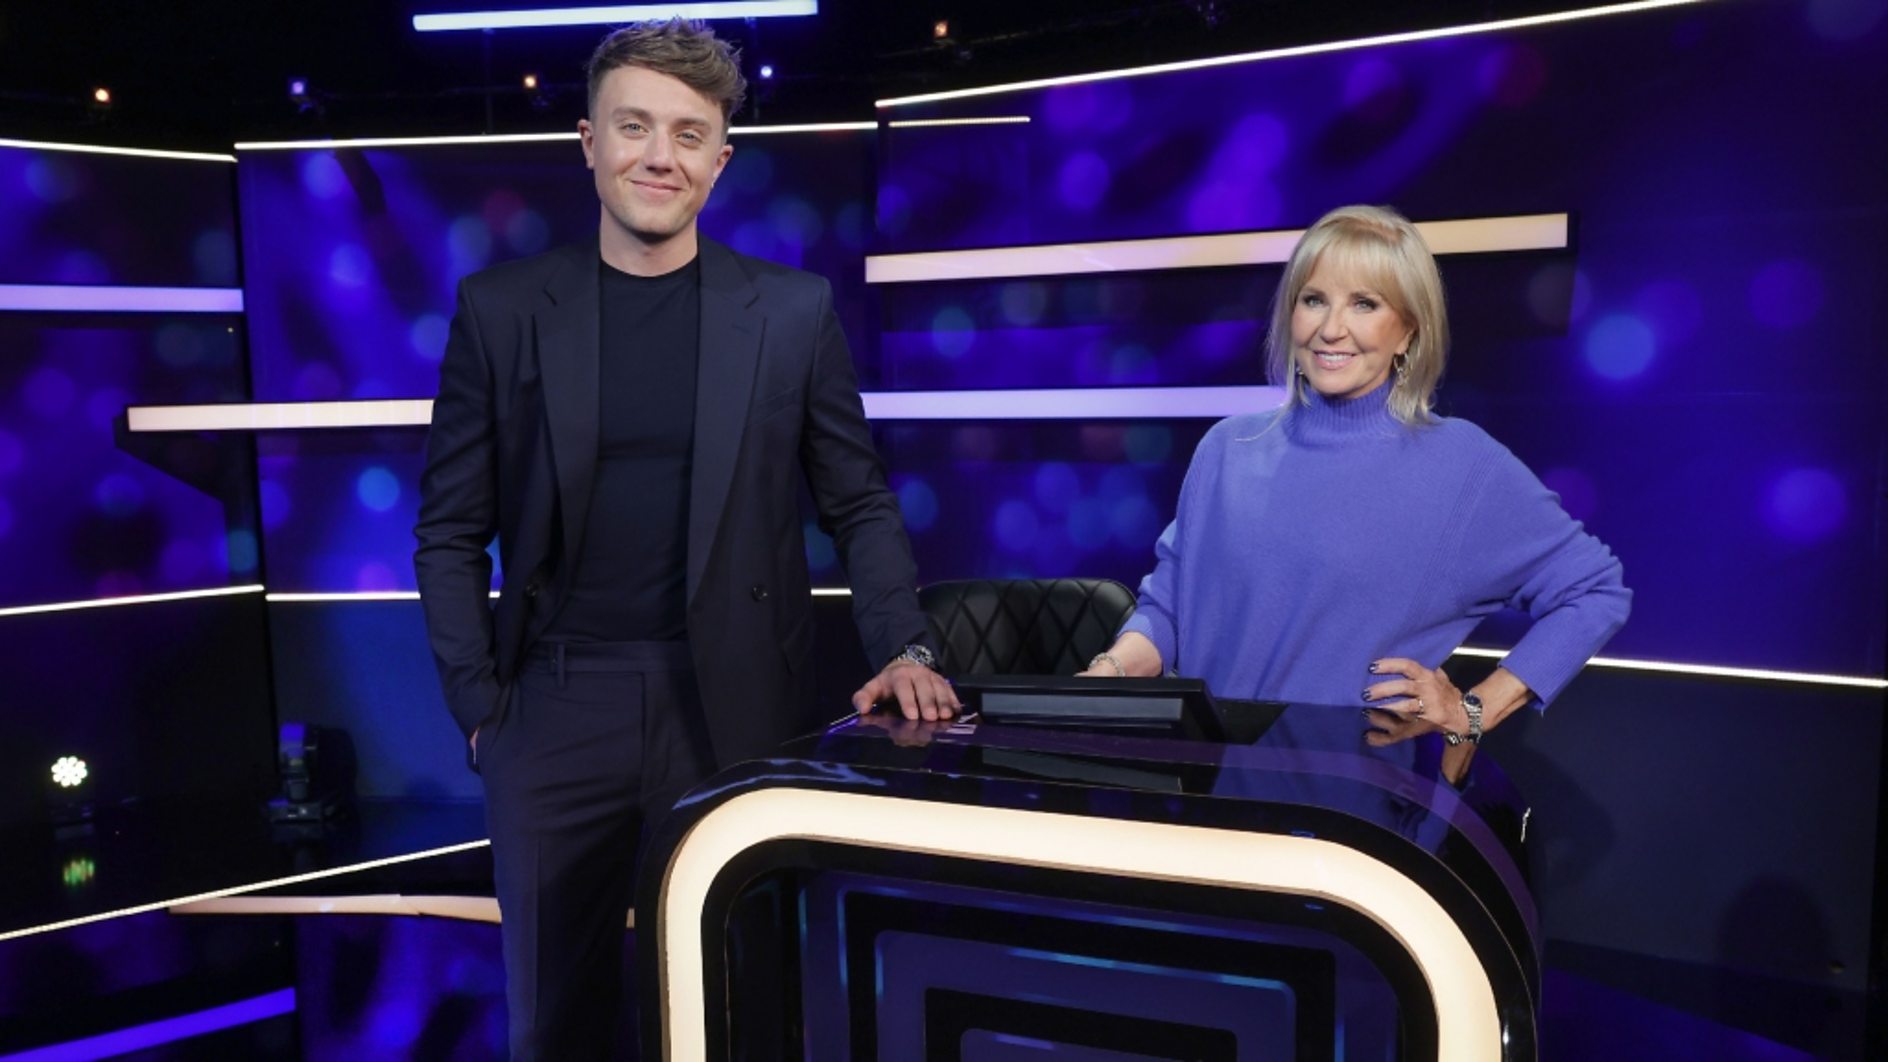 Roman Kemp and Sarah Greene return to Northern Ireland for series two of quiz show The Finish Line